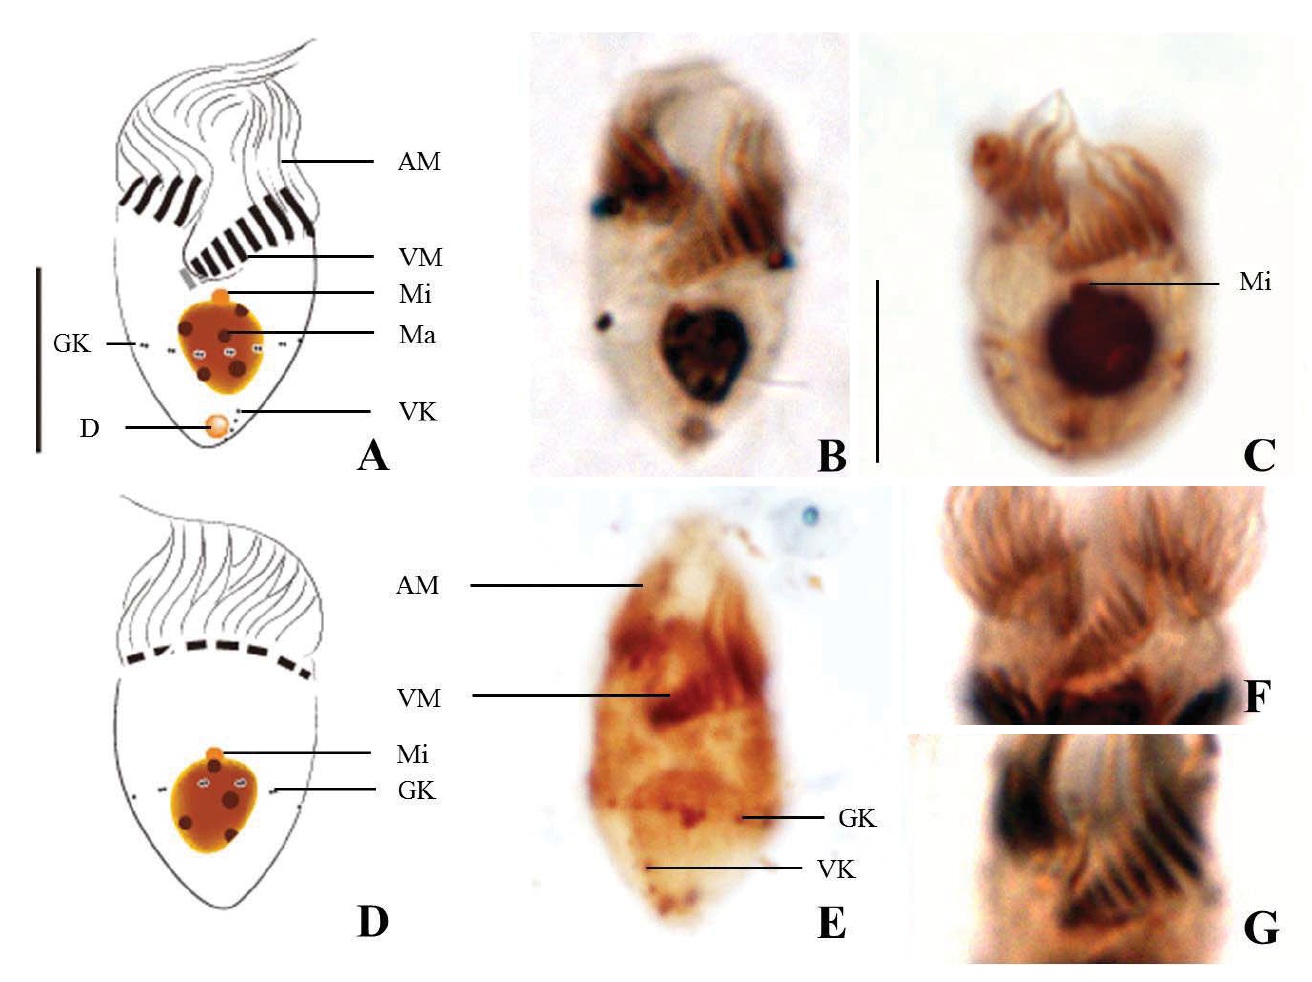 Strombidium pollostomum after protargol impregnation. A-C, E, Ventral view; D, Dorsal view; F, Arrangement of oral membranelles from S. epidemum and G, from S. pollostomum. AM, anterior membranelles; GK, girdle kinety; Ma, macronucleus; Mi, micronucleus; D, a tiny globular drop at posterior end; VK, ventral kinety; VM, ventral membranelles. Scale bars: A, C=10 μm.